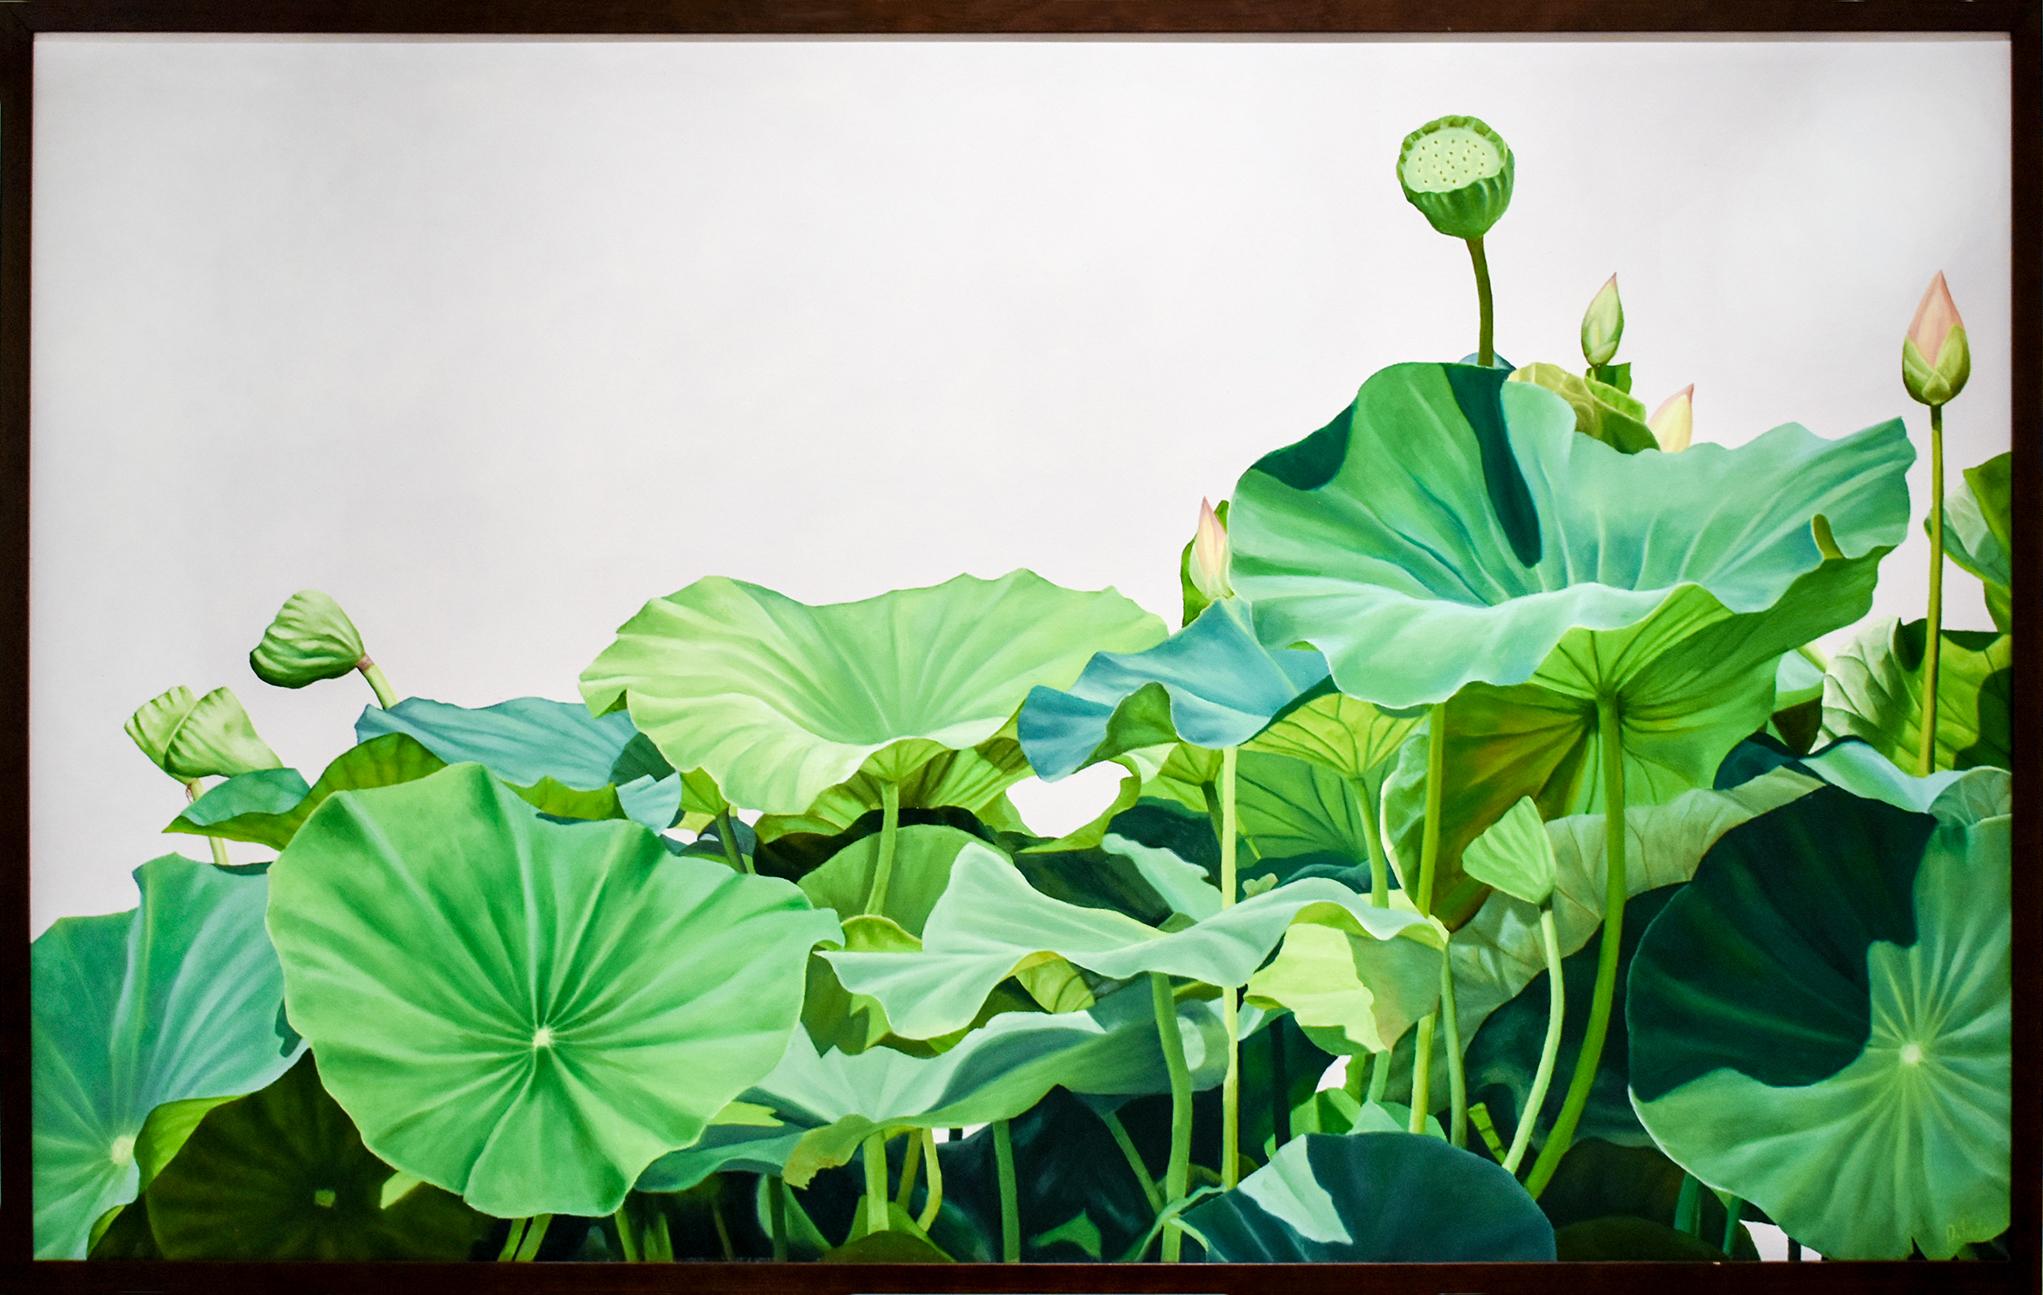 Lotus No. 1 (Contemporary Hard Edge Realist Still Life of Bright Botanicals) - Painting by Frank DePietro